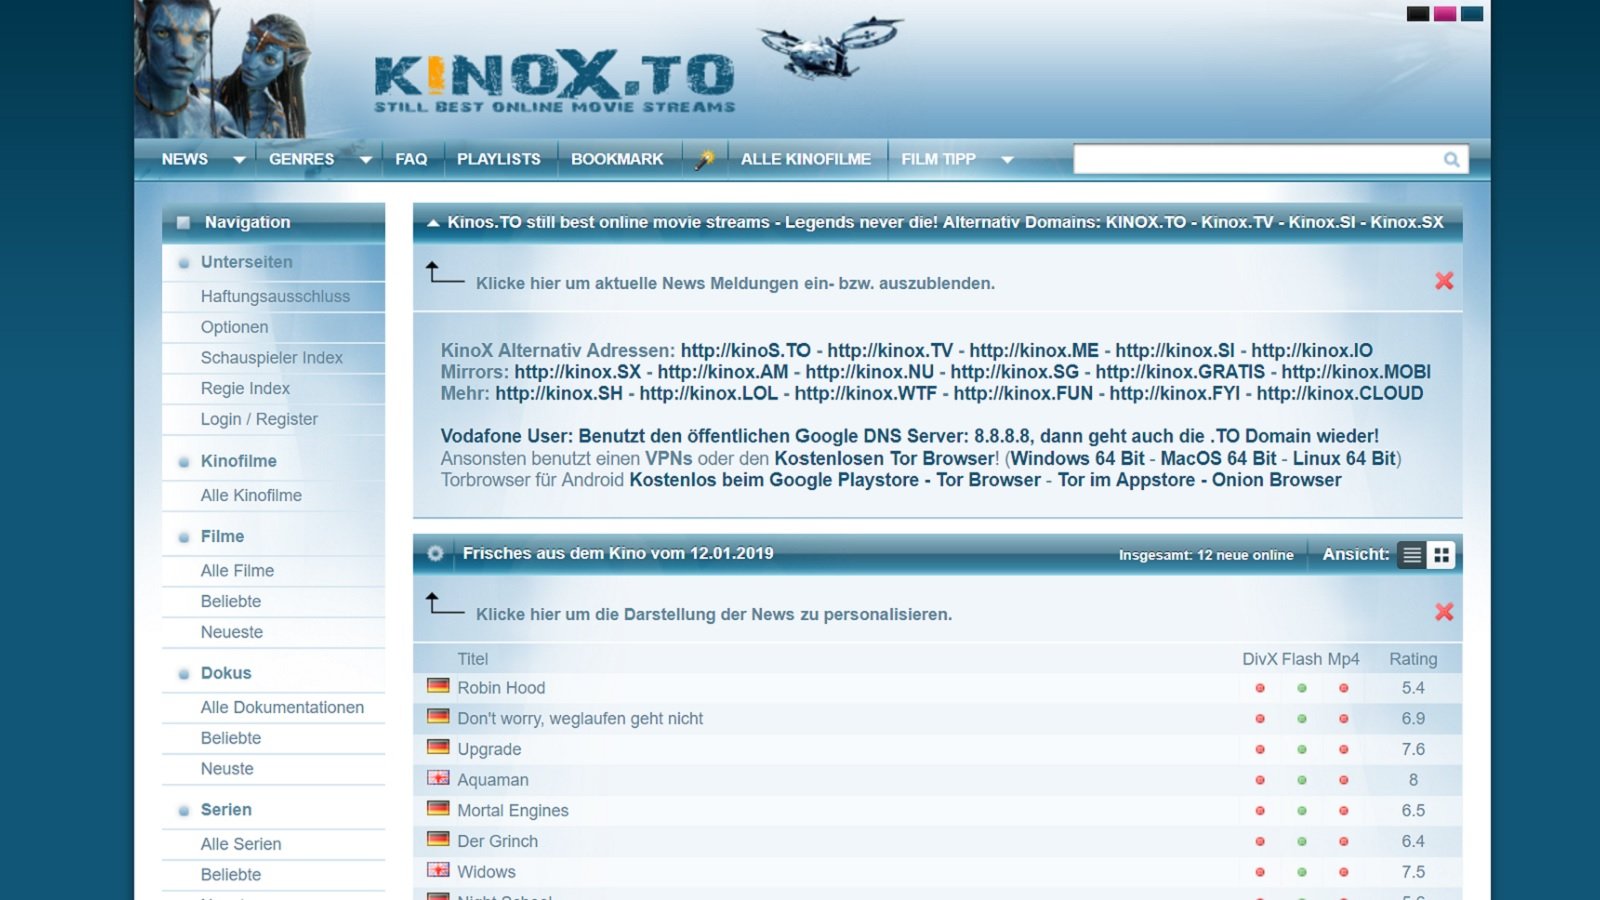 Domains of Pirate Website Kinox Put Up for Sale on eBay